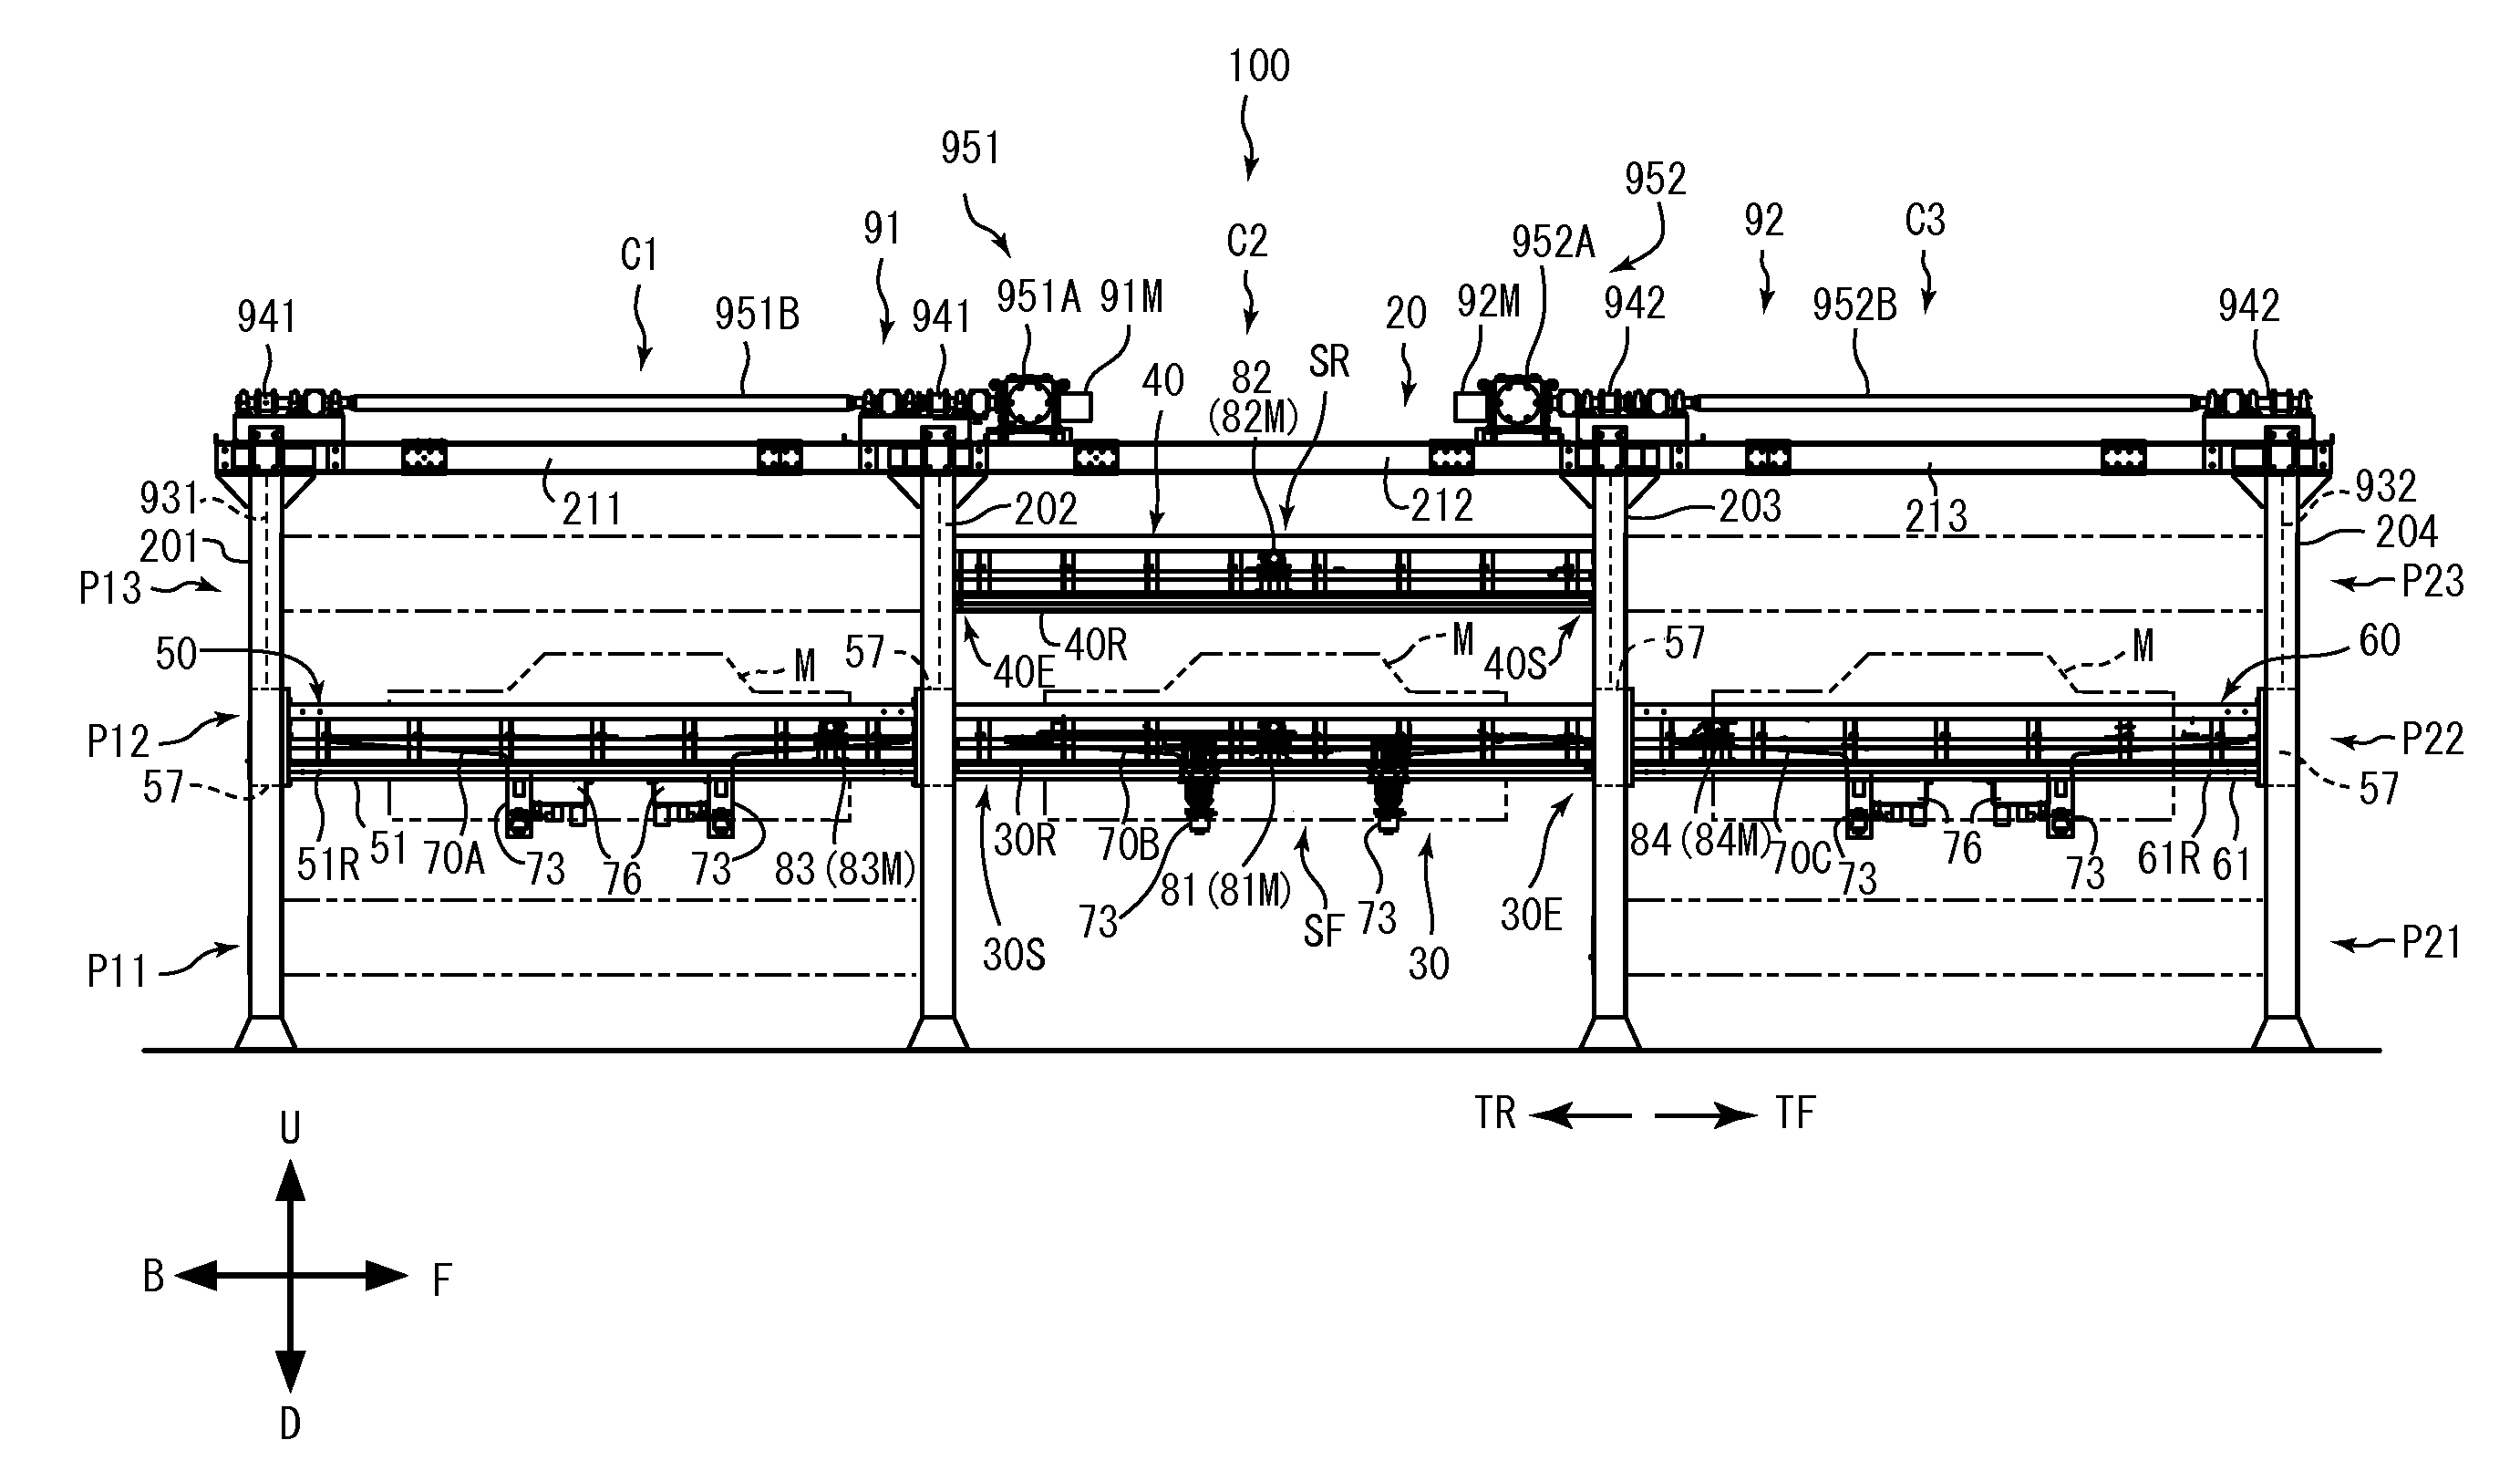 Assembly/transport apparatus